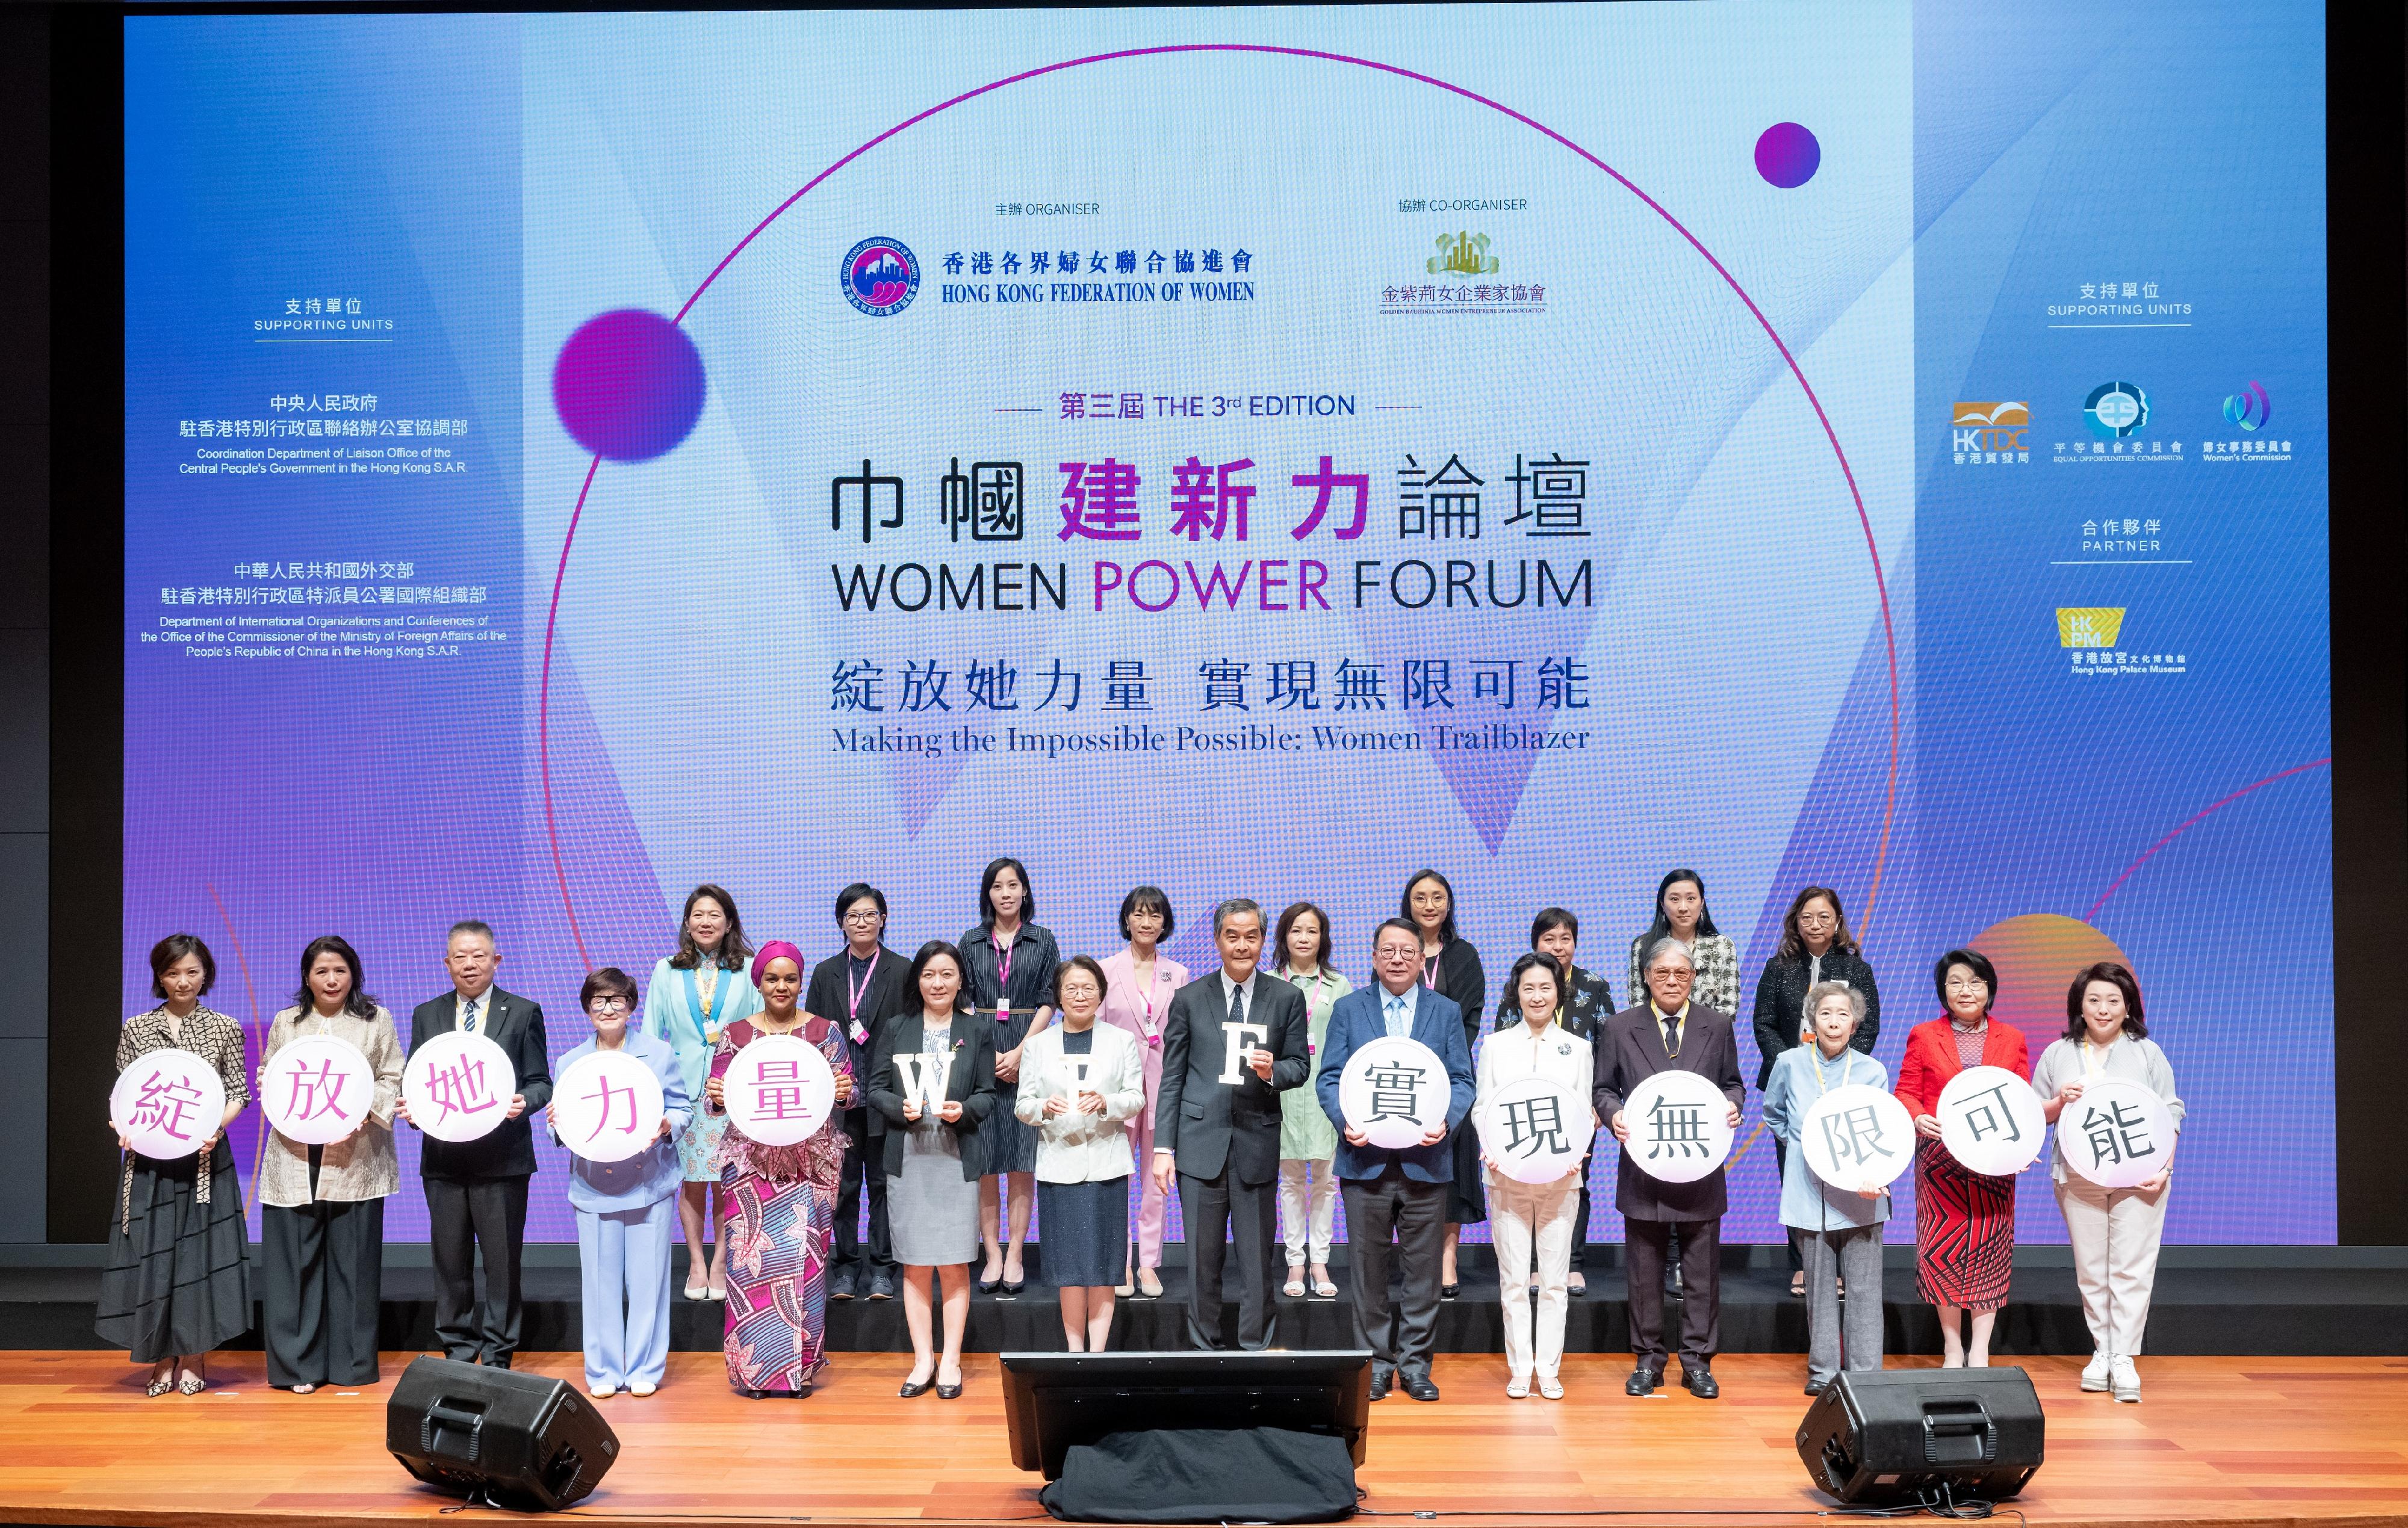 The Chief Secretary for Administration, Mr Chan Kwok-ki, attended the Third Edition Women Power Forum today (June 30). Photo shows (front row, from fifth left) the First Lady of the 8th President of Zanzibar, Mrs Mariam Mwinyi; Deputy Director of the Liaison Office of the Central People's Government in the Hong Kong Special Administrative Region Ms Lu Xinning; the Secretary of the Leading Party Members' Group, Vice-President and First Member of the Secretariat of the All-China Women's Federation, and Vice-Chairperson of the National Working Committee on Children and Women under the State Council, Ms Huang Xiaowei; the Vice-Chairman of the National Committee of the Chinese People's Political Consultative Conference and Honorary Advisor of the Women Power Forum, Mr C Y Leung; Mr Chan; the Chairperson of the Hong Kong Federation of Women and the Chairperson of the Women Power Forum, Ms Pansy Ho, and other guests at the forum.